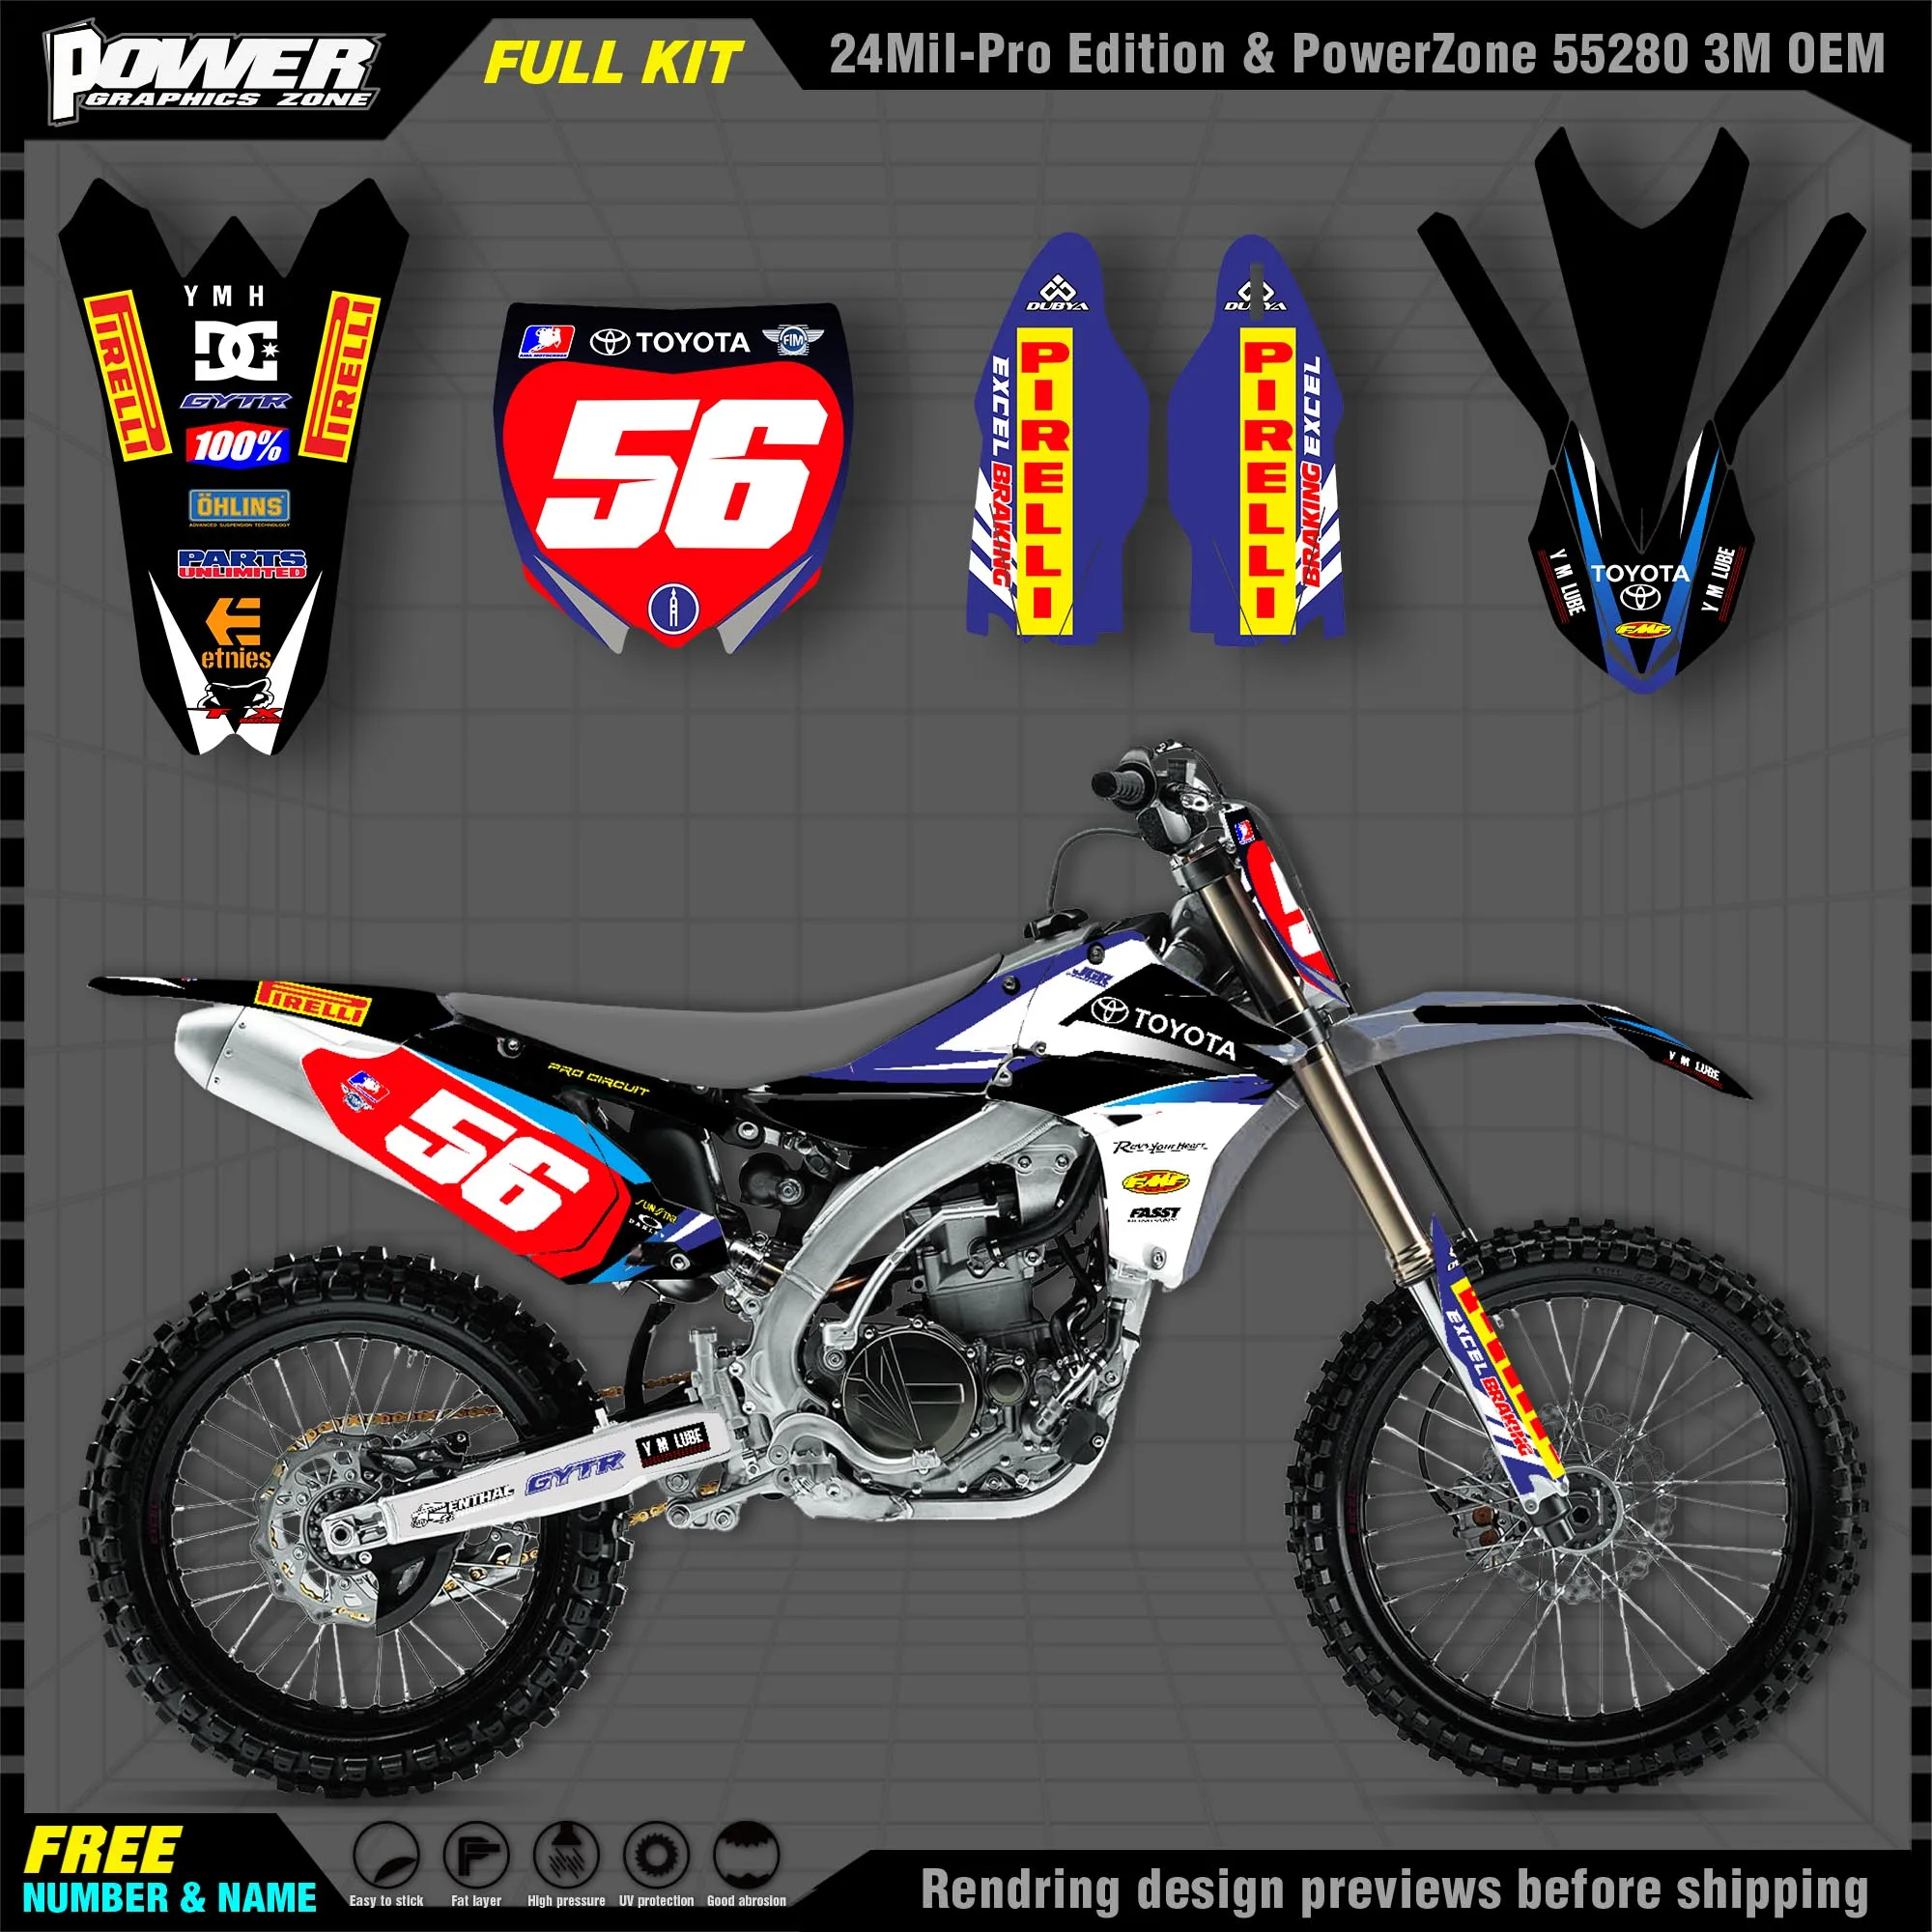 

PowerZone Custom Team Graphics Backgrounds Decals 3M Stickers Kit For YAMAHA 2010-2013 YZF450 003